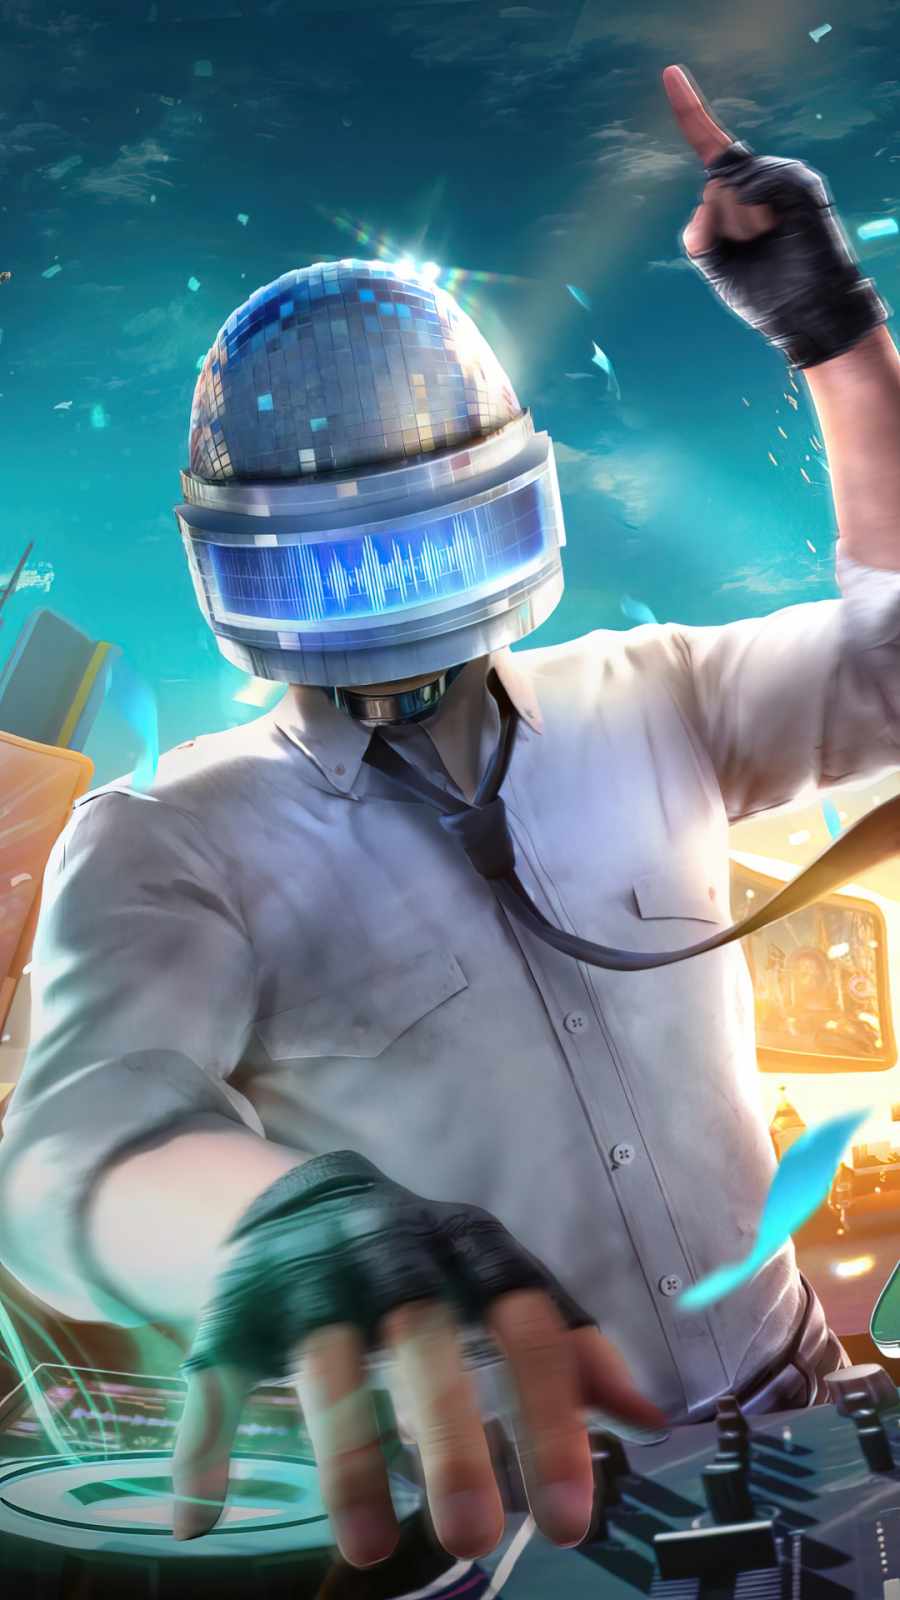 Pubg New State IPhone Wallpaper - IPhone Wallpapers : iPhone Wallpapers